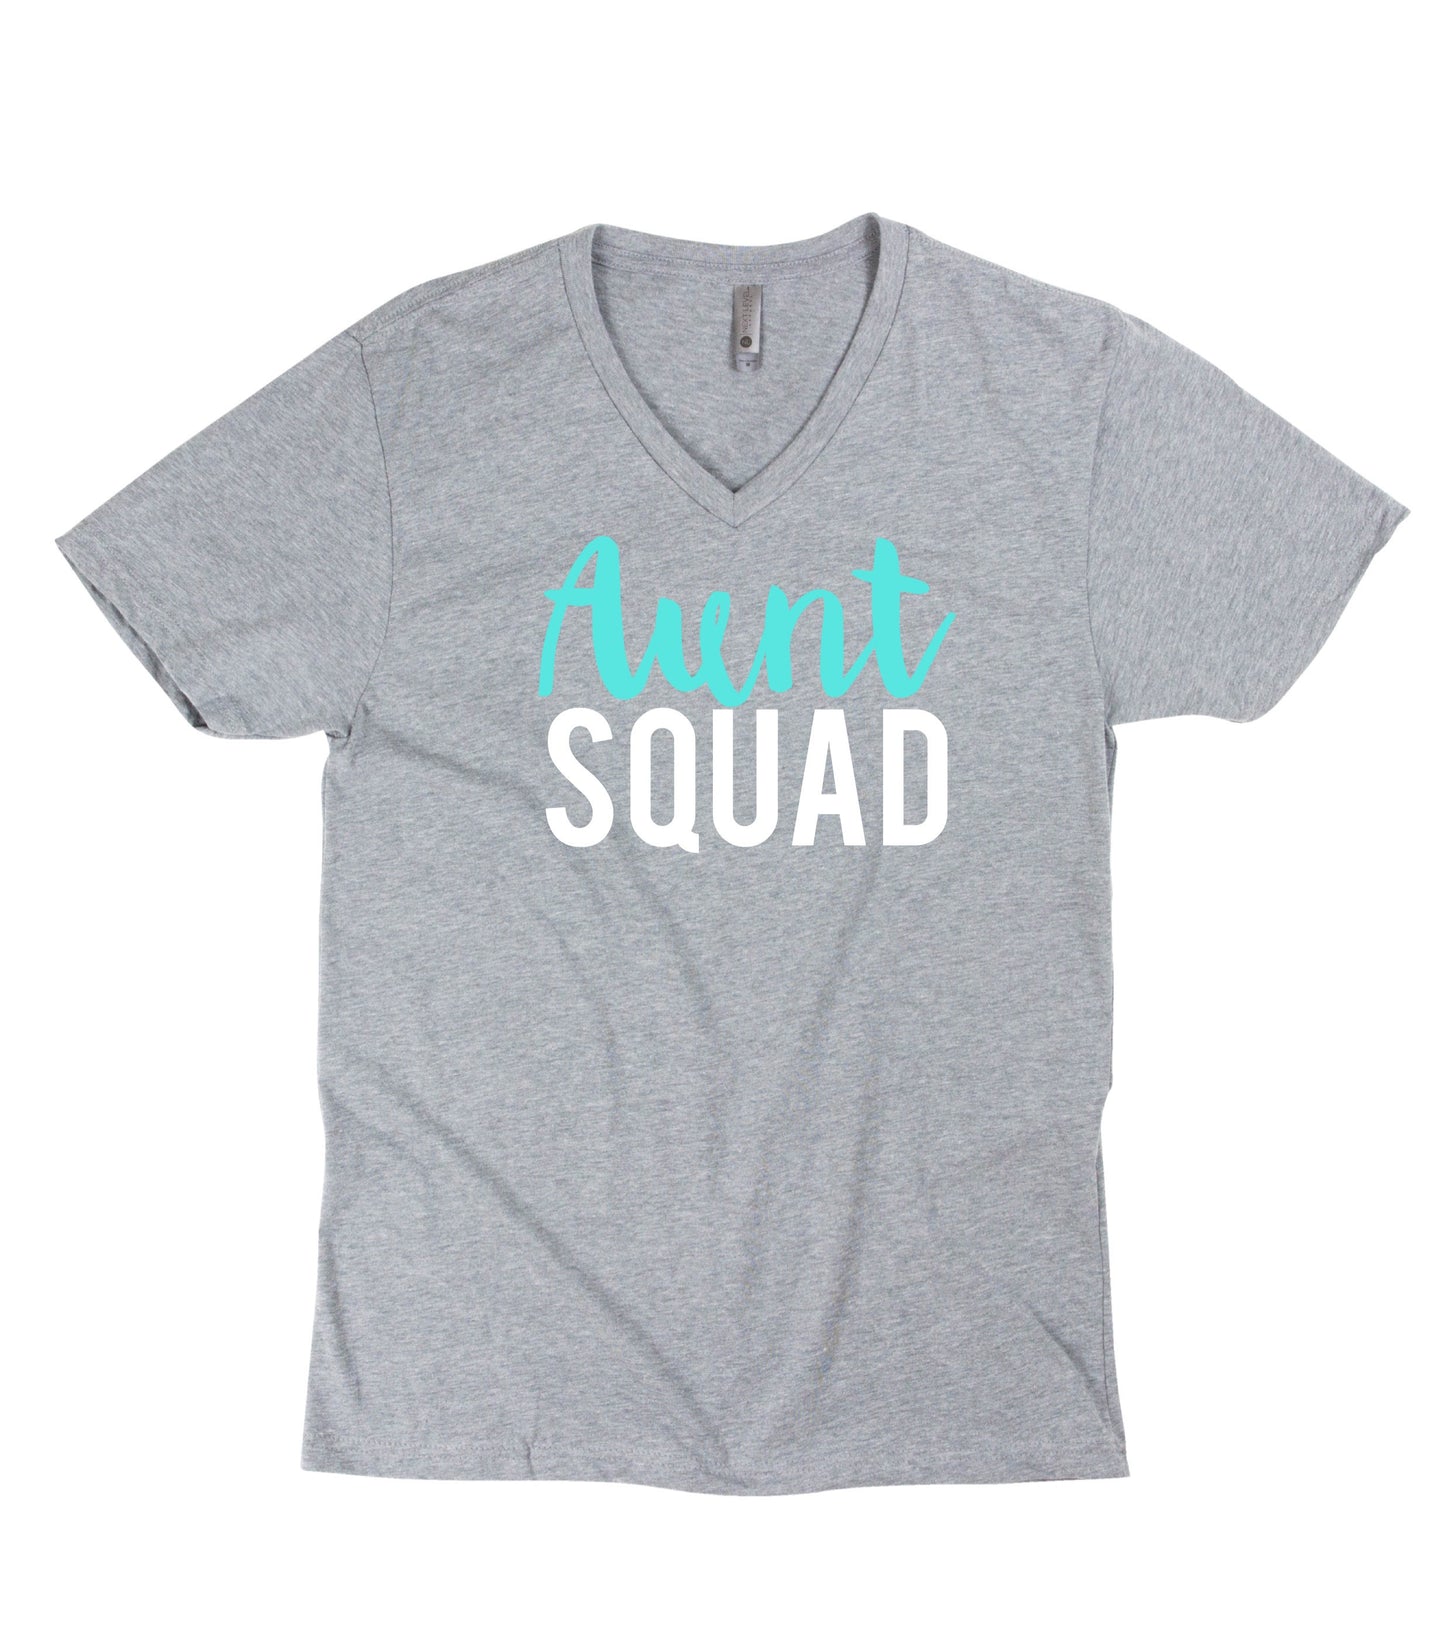 Aunt Squad tee, aunt shirt, gift for aunt to be, Christmas gift, aunt and me, aunt squad shirt, gender reveal shirt for aunt, team boy shirt